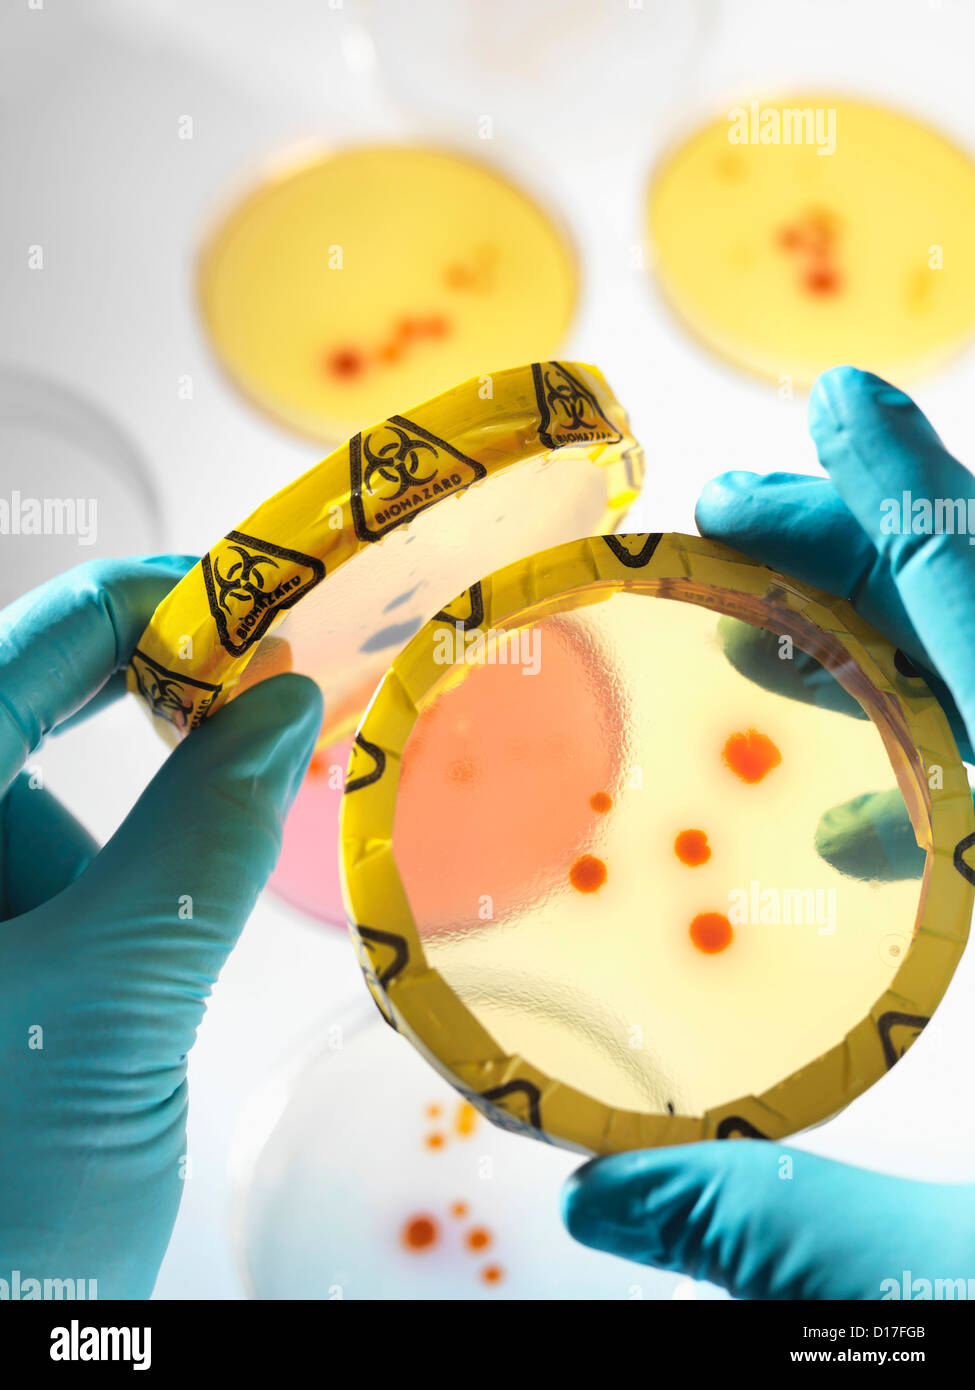 Micro organisms growing in petri dishes with biohazard label being examined by scientist. Stock Photo